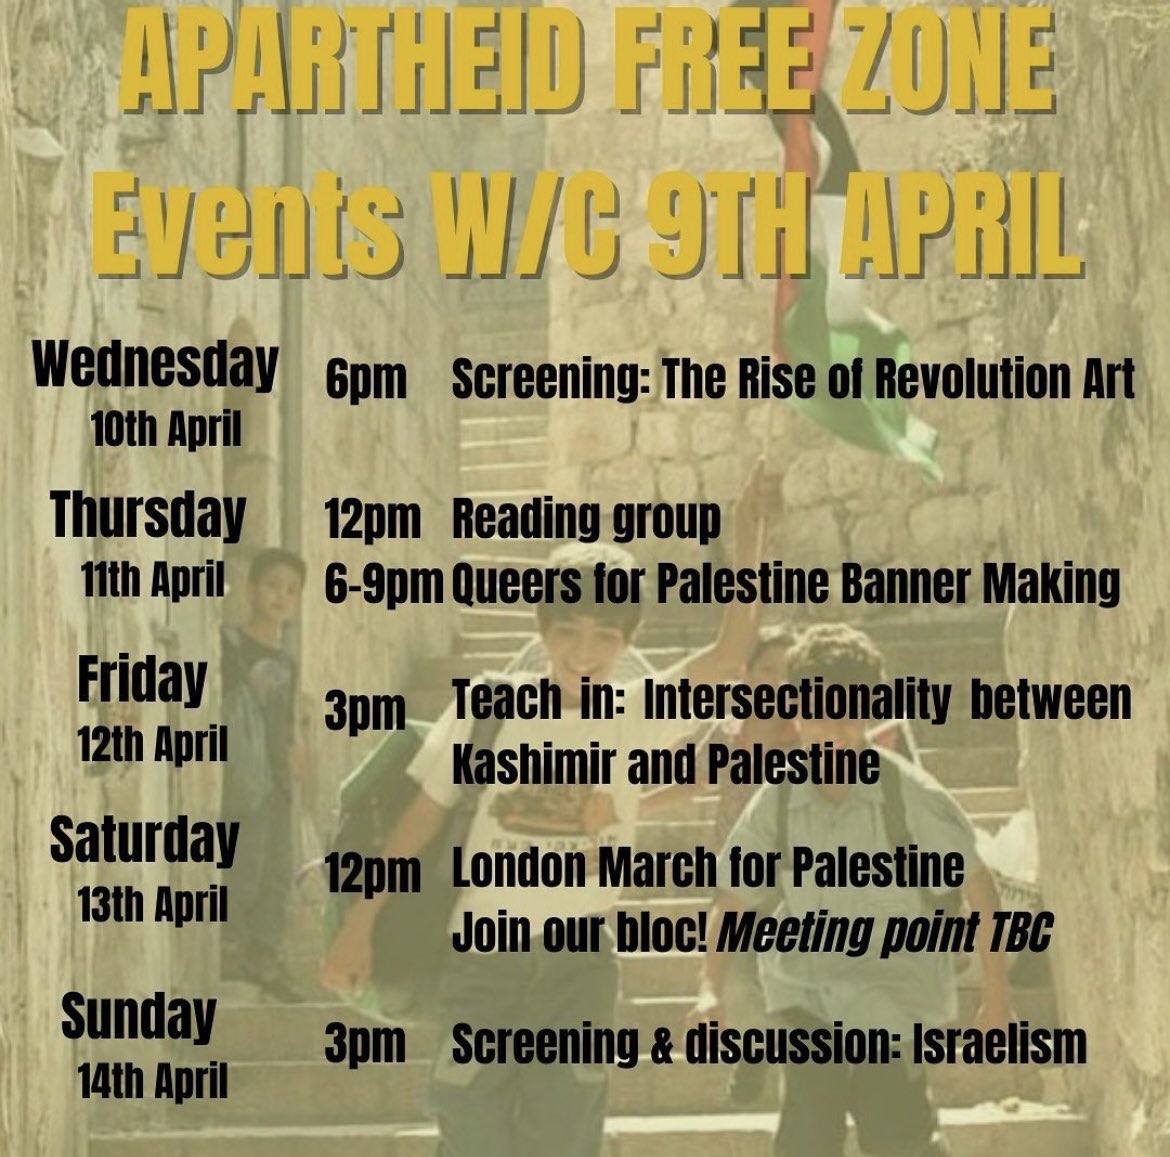 Reminder of events in the Apartheid Free Zone this week! Teach in today on intersectionality between Kashmir and Palestine, 3pm 📍🫶🏽